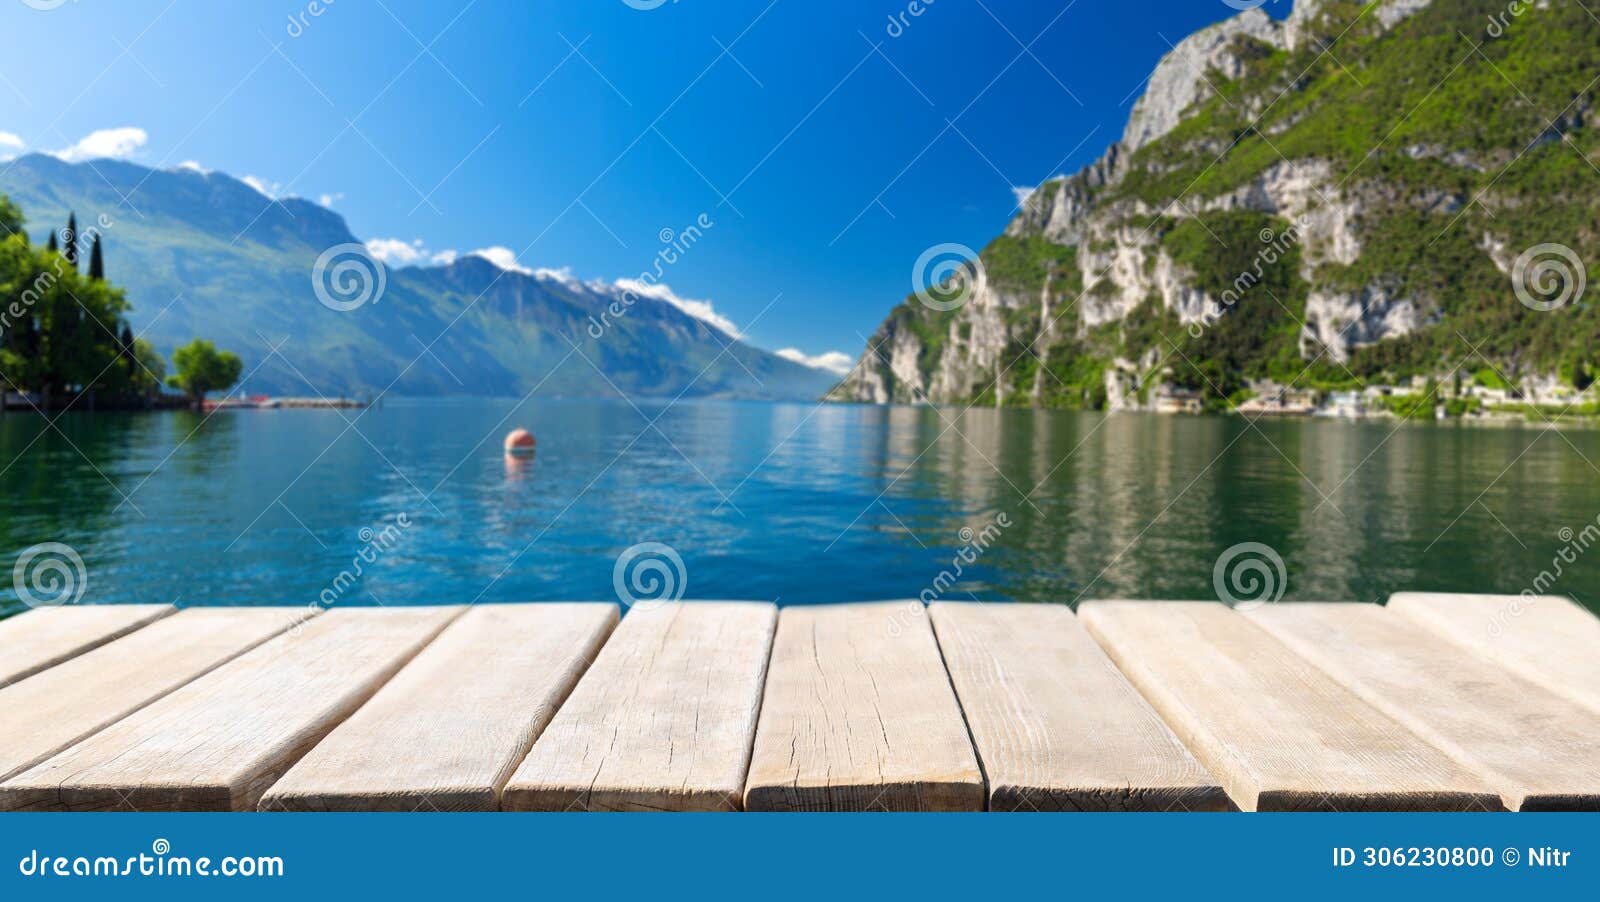 empty wooden table and summer view of lake garda in italy, europe